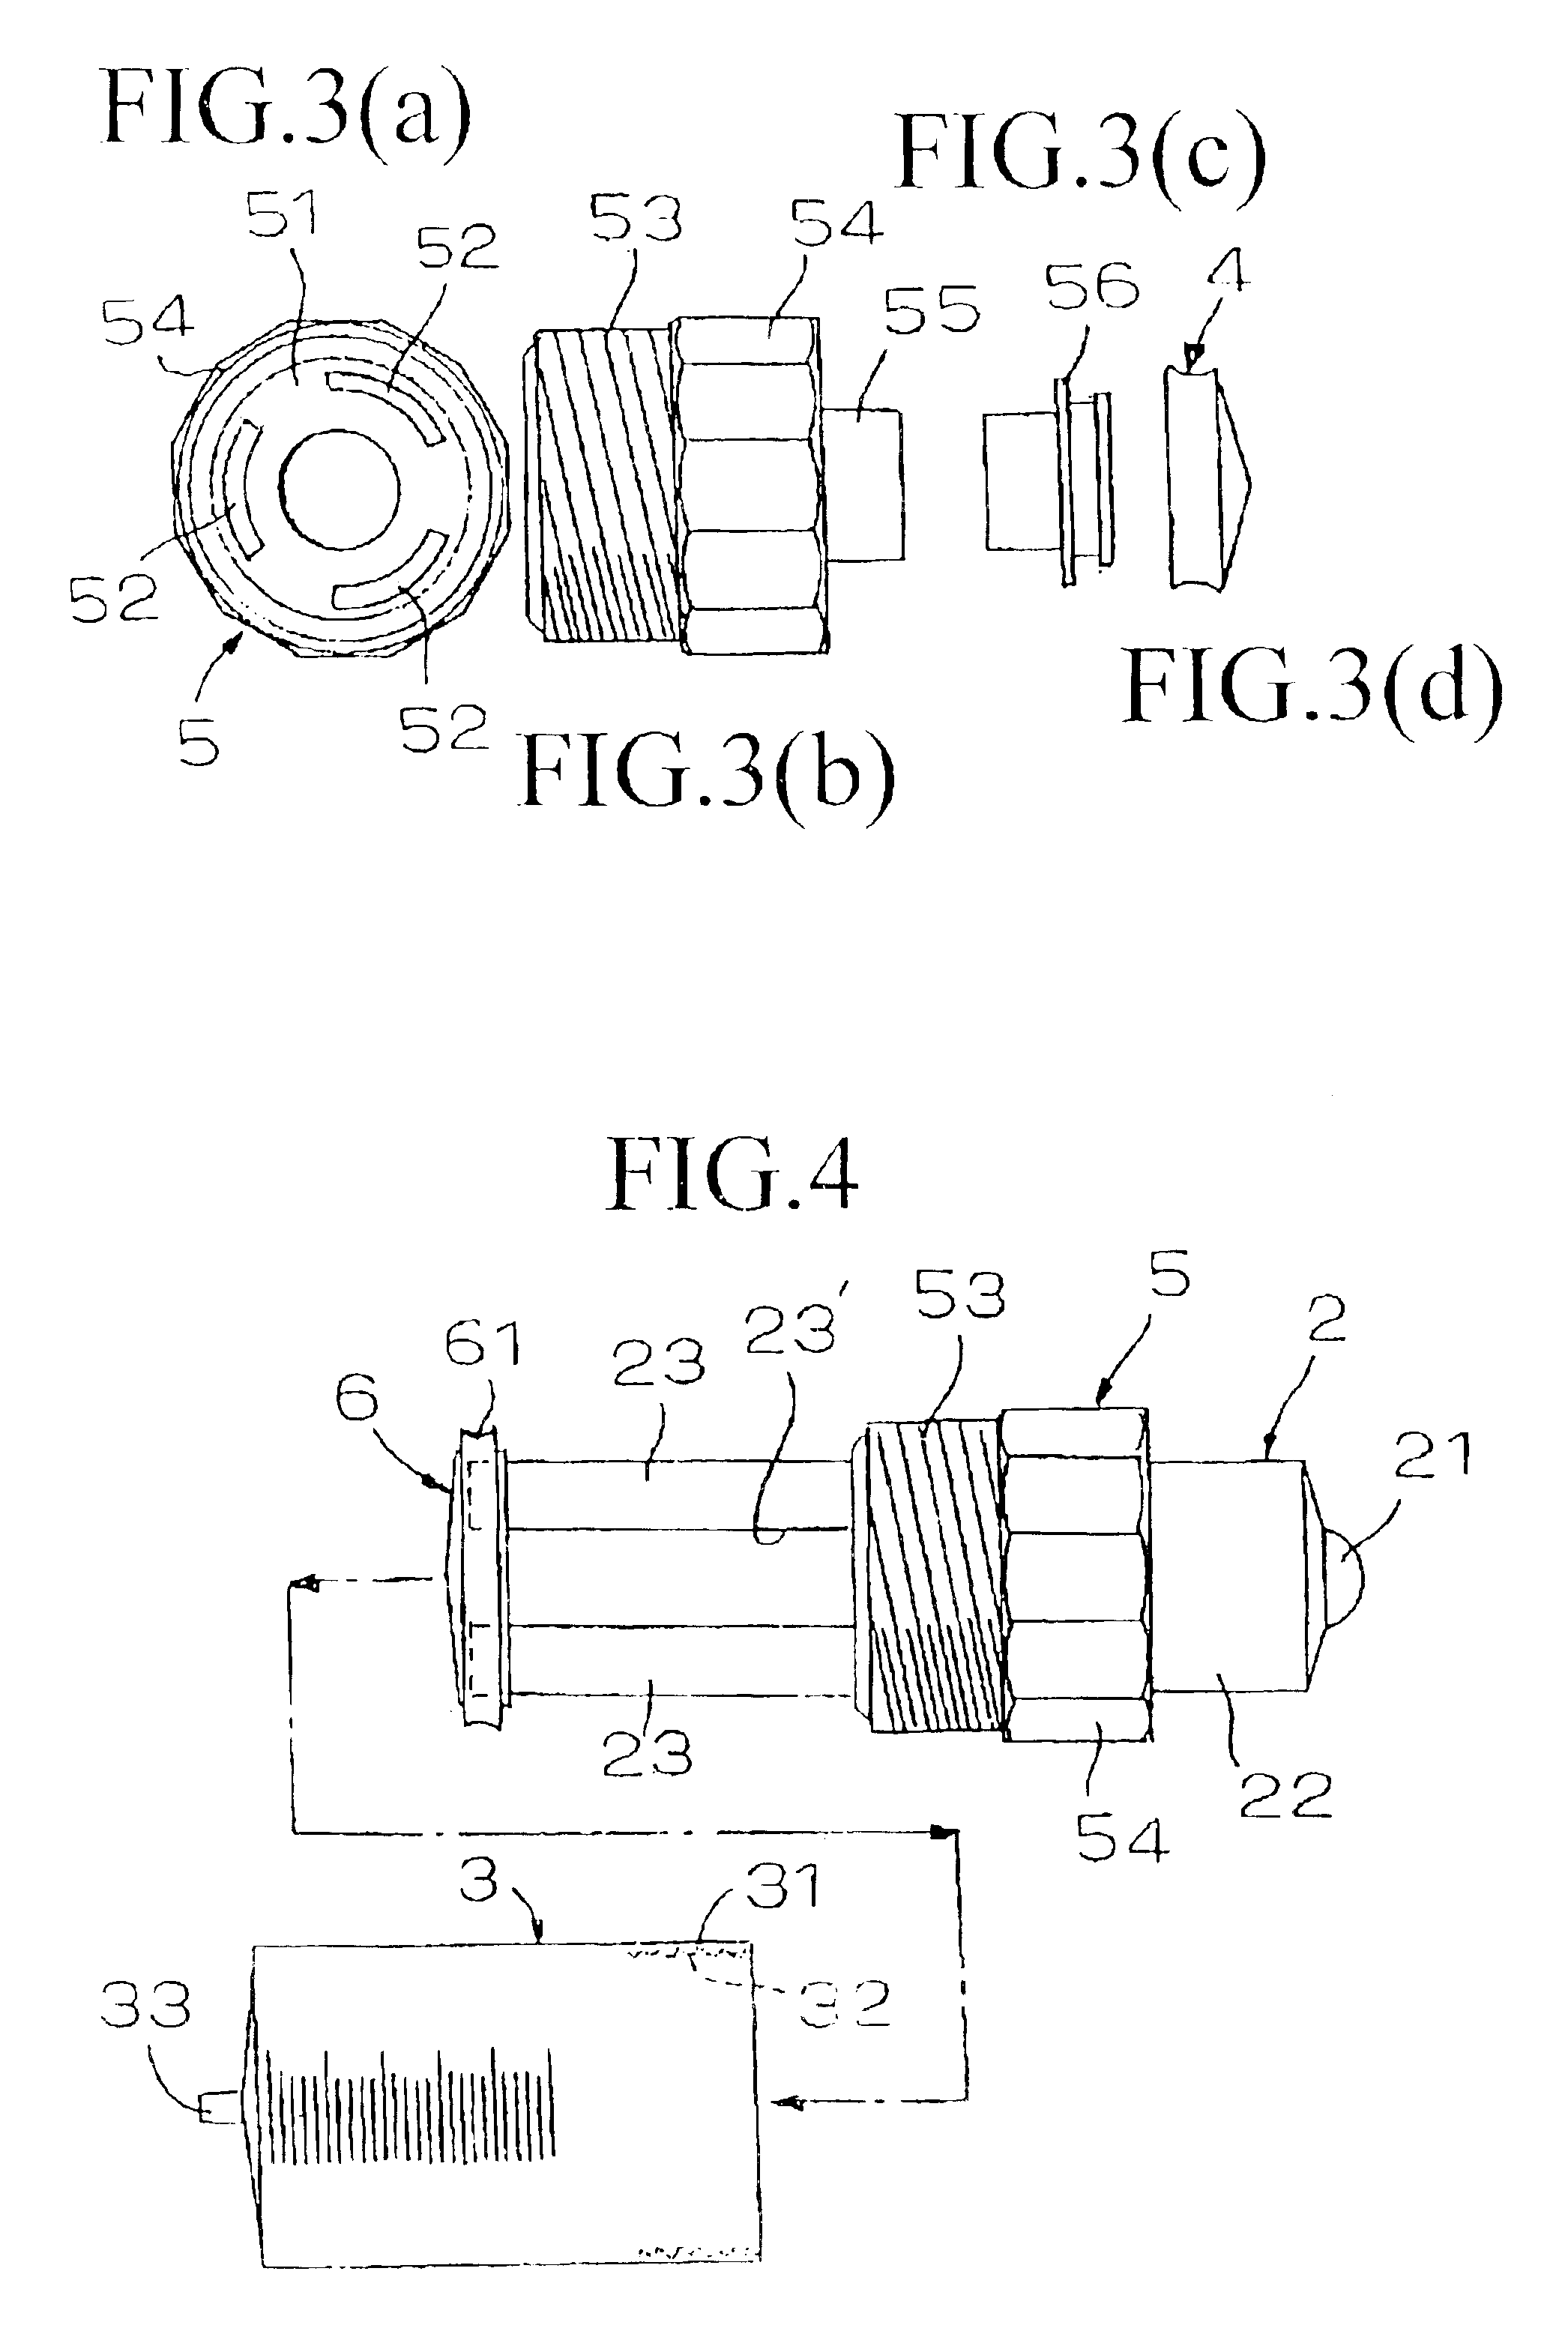 Continuous liquid infusion device